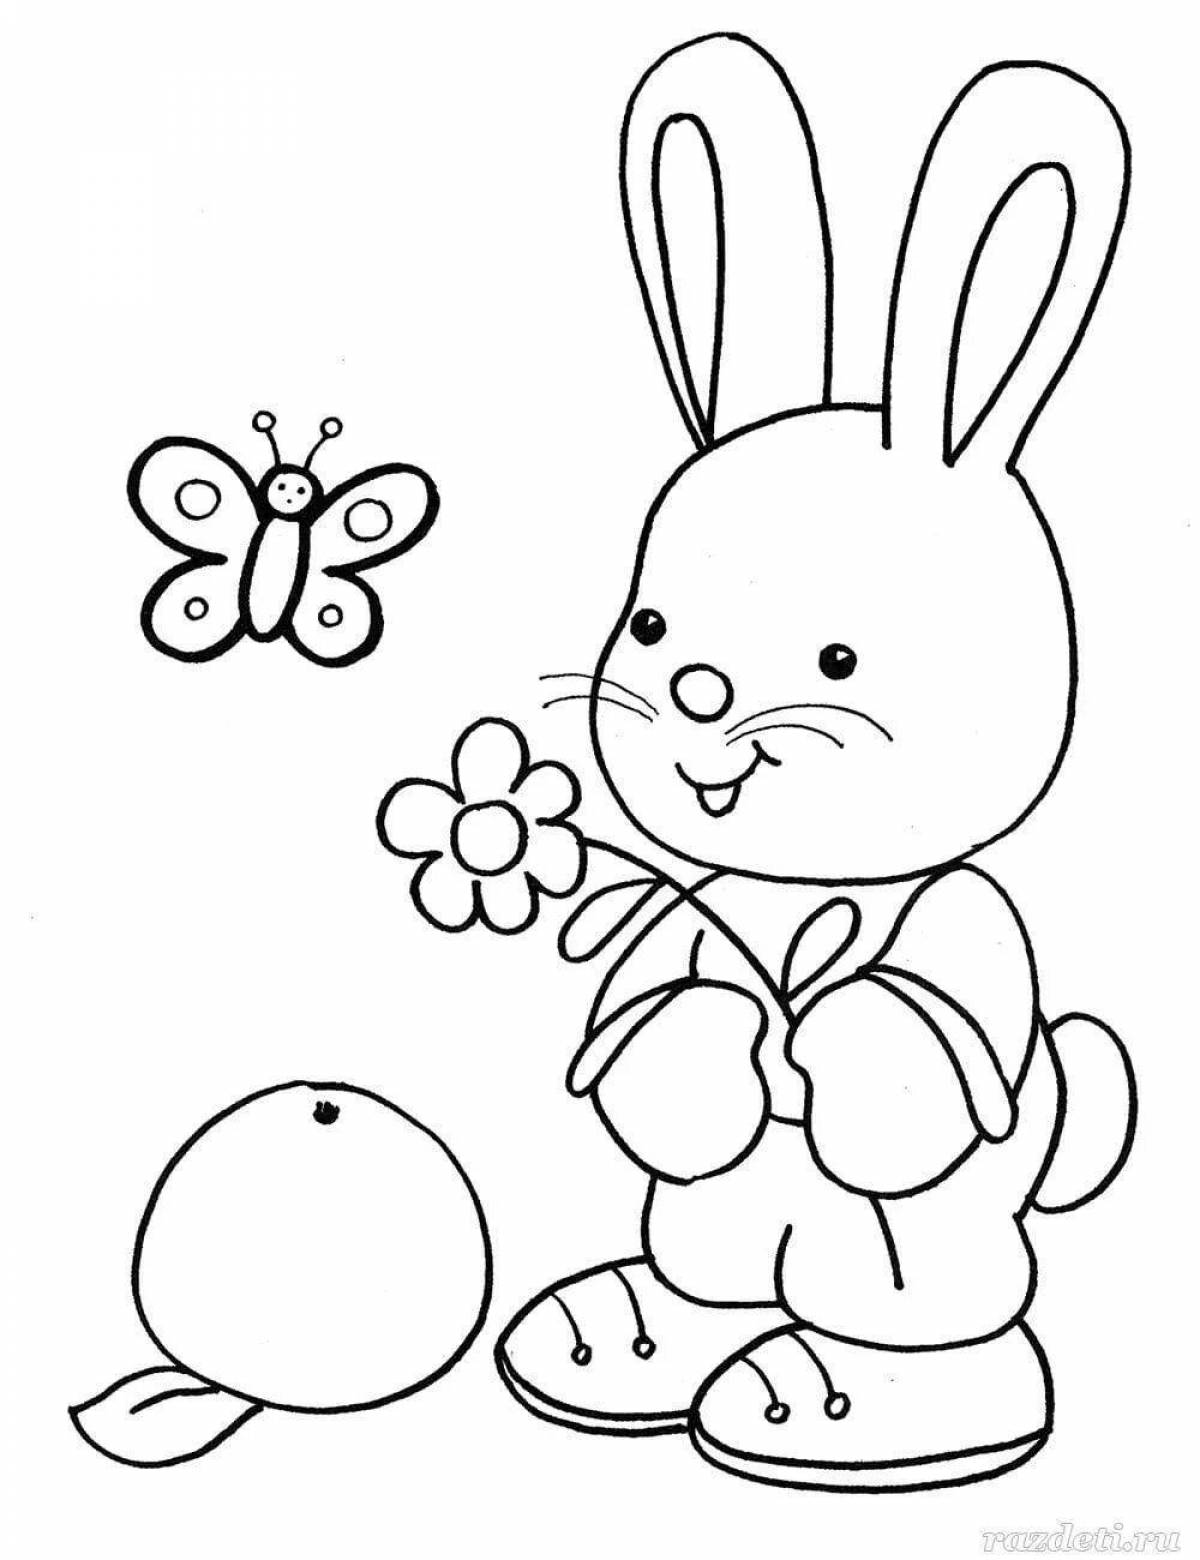 Colored coloring pages for children 3 4